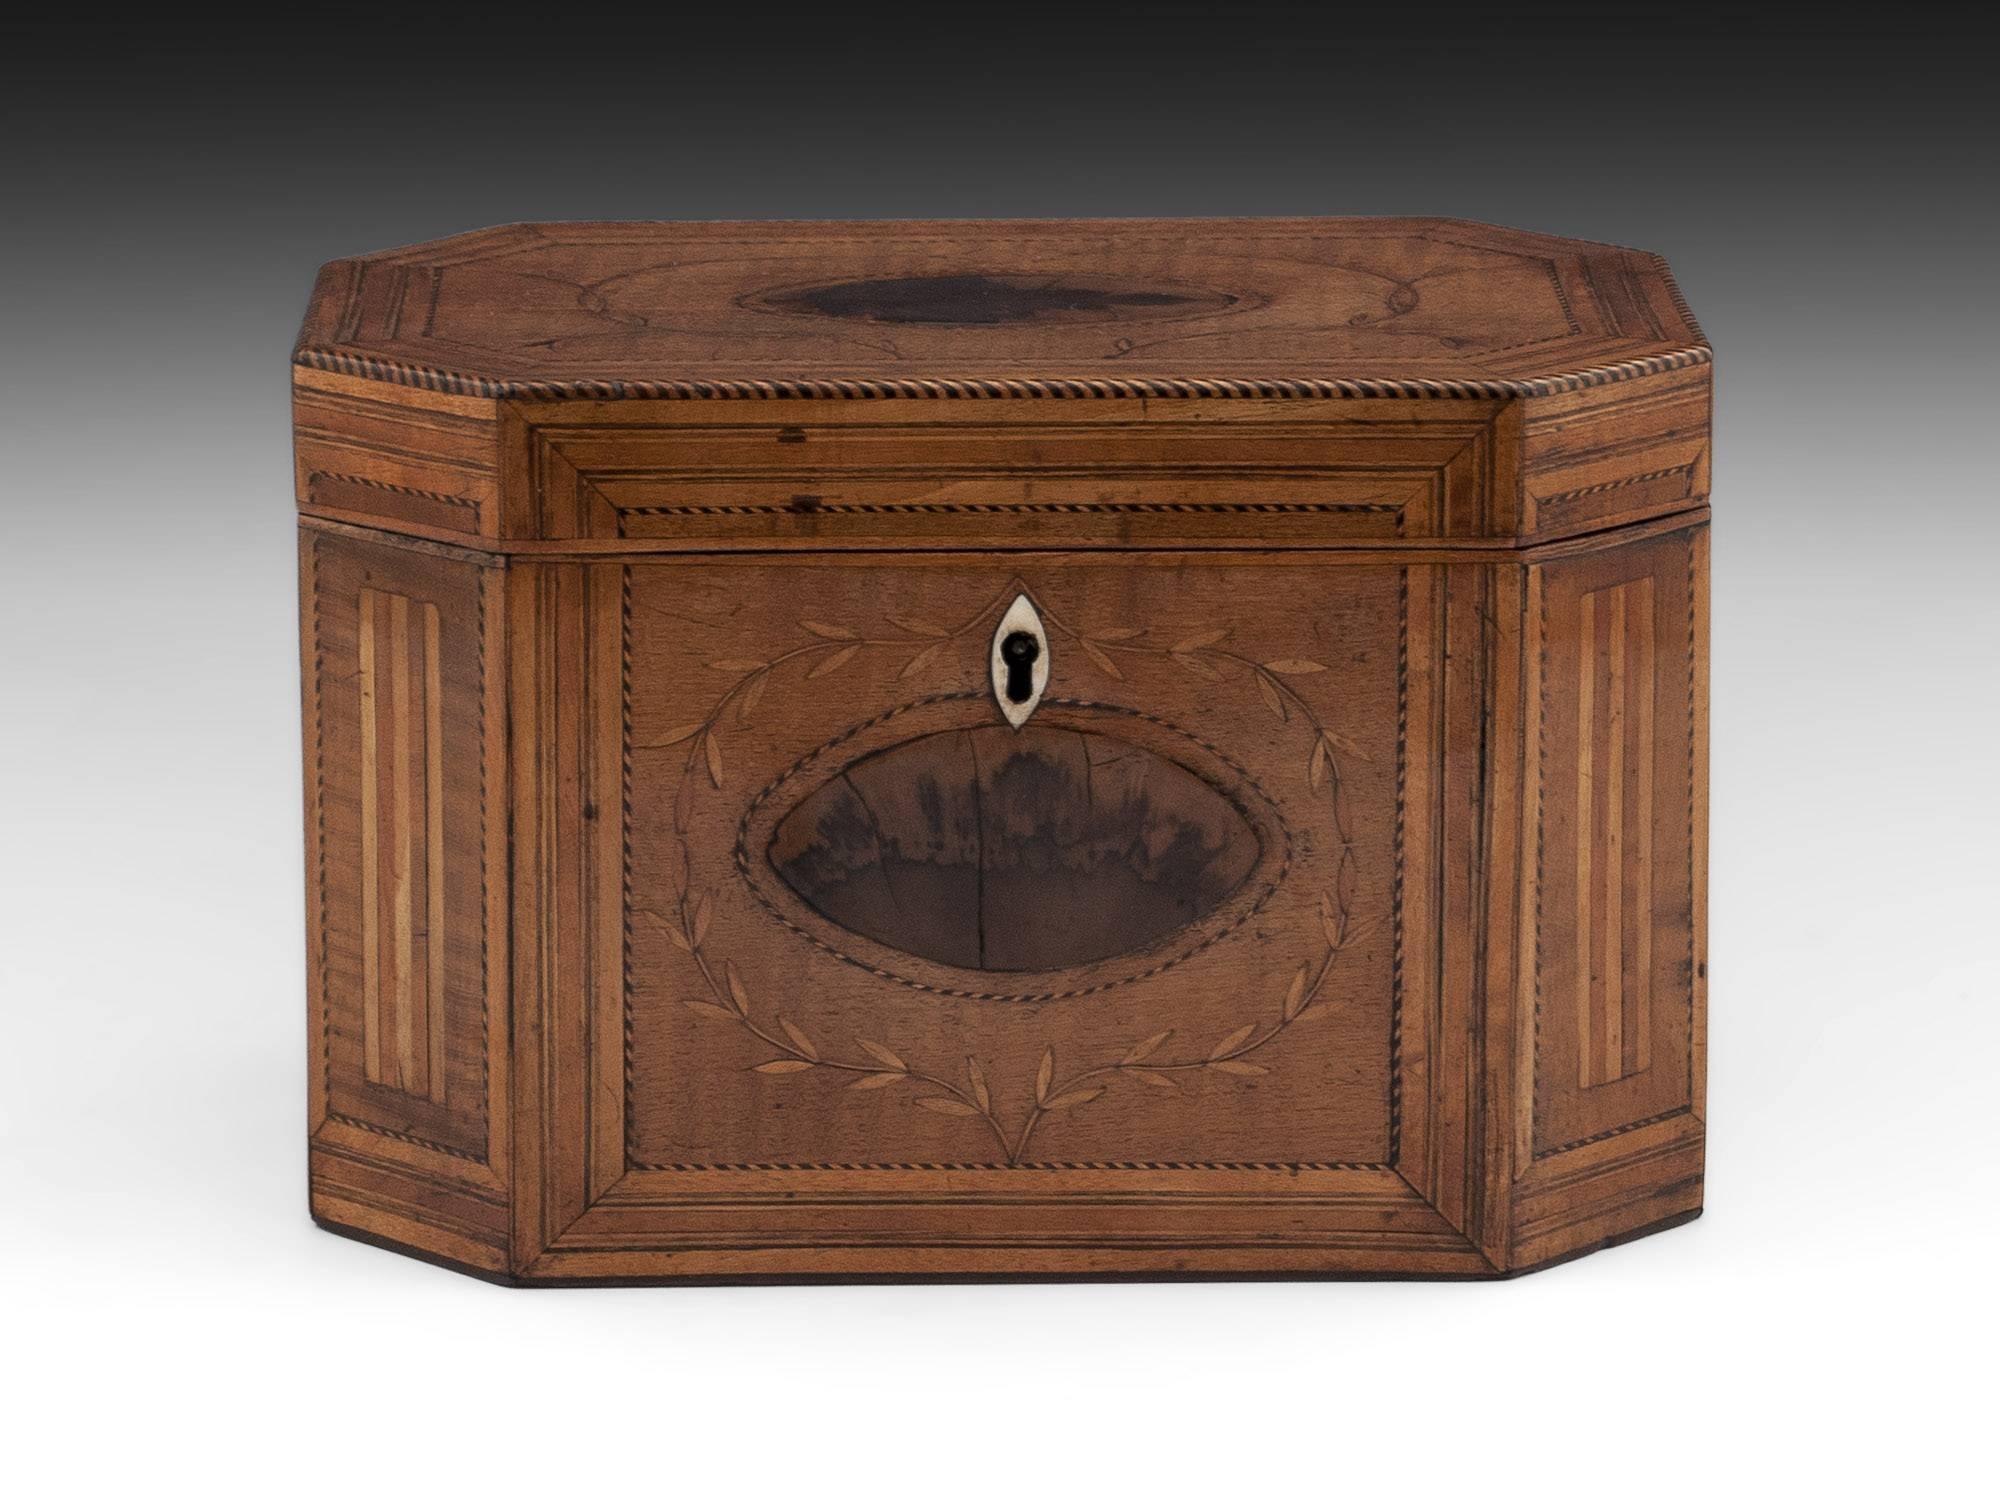 Georgian harewood tea caddy inlaid with boxwood and sycamore fluted cants, its edged and inlaid with a chequered boxwood and ebony stringing. This wonderful georgian tea caddy is inlaid with superb black thorn oysters, to the top, front, and both